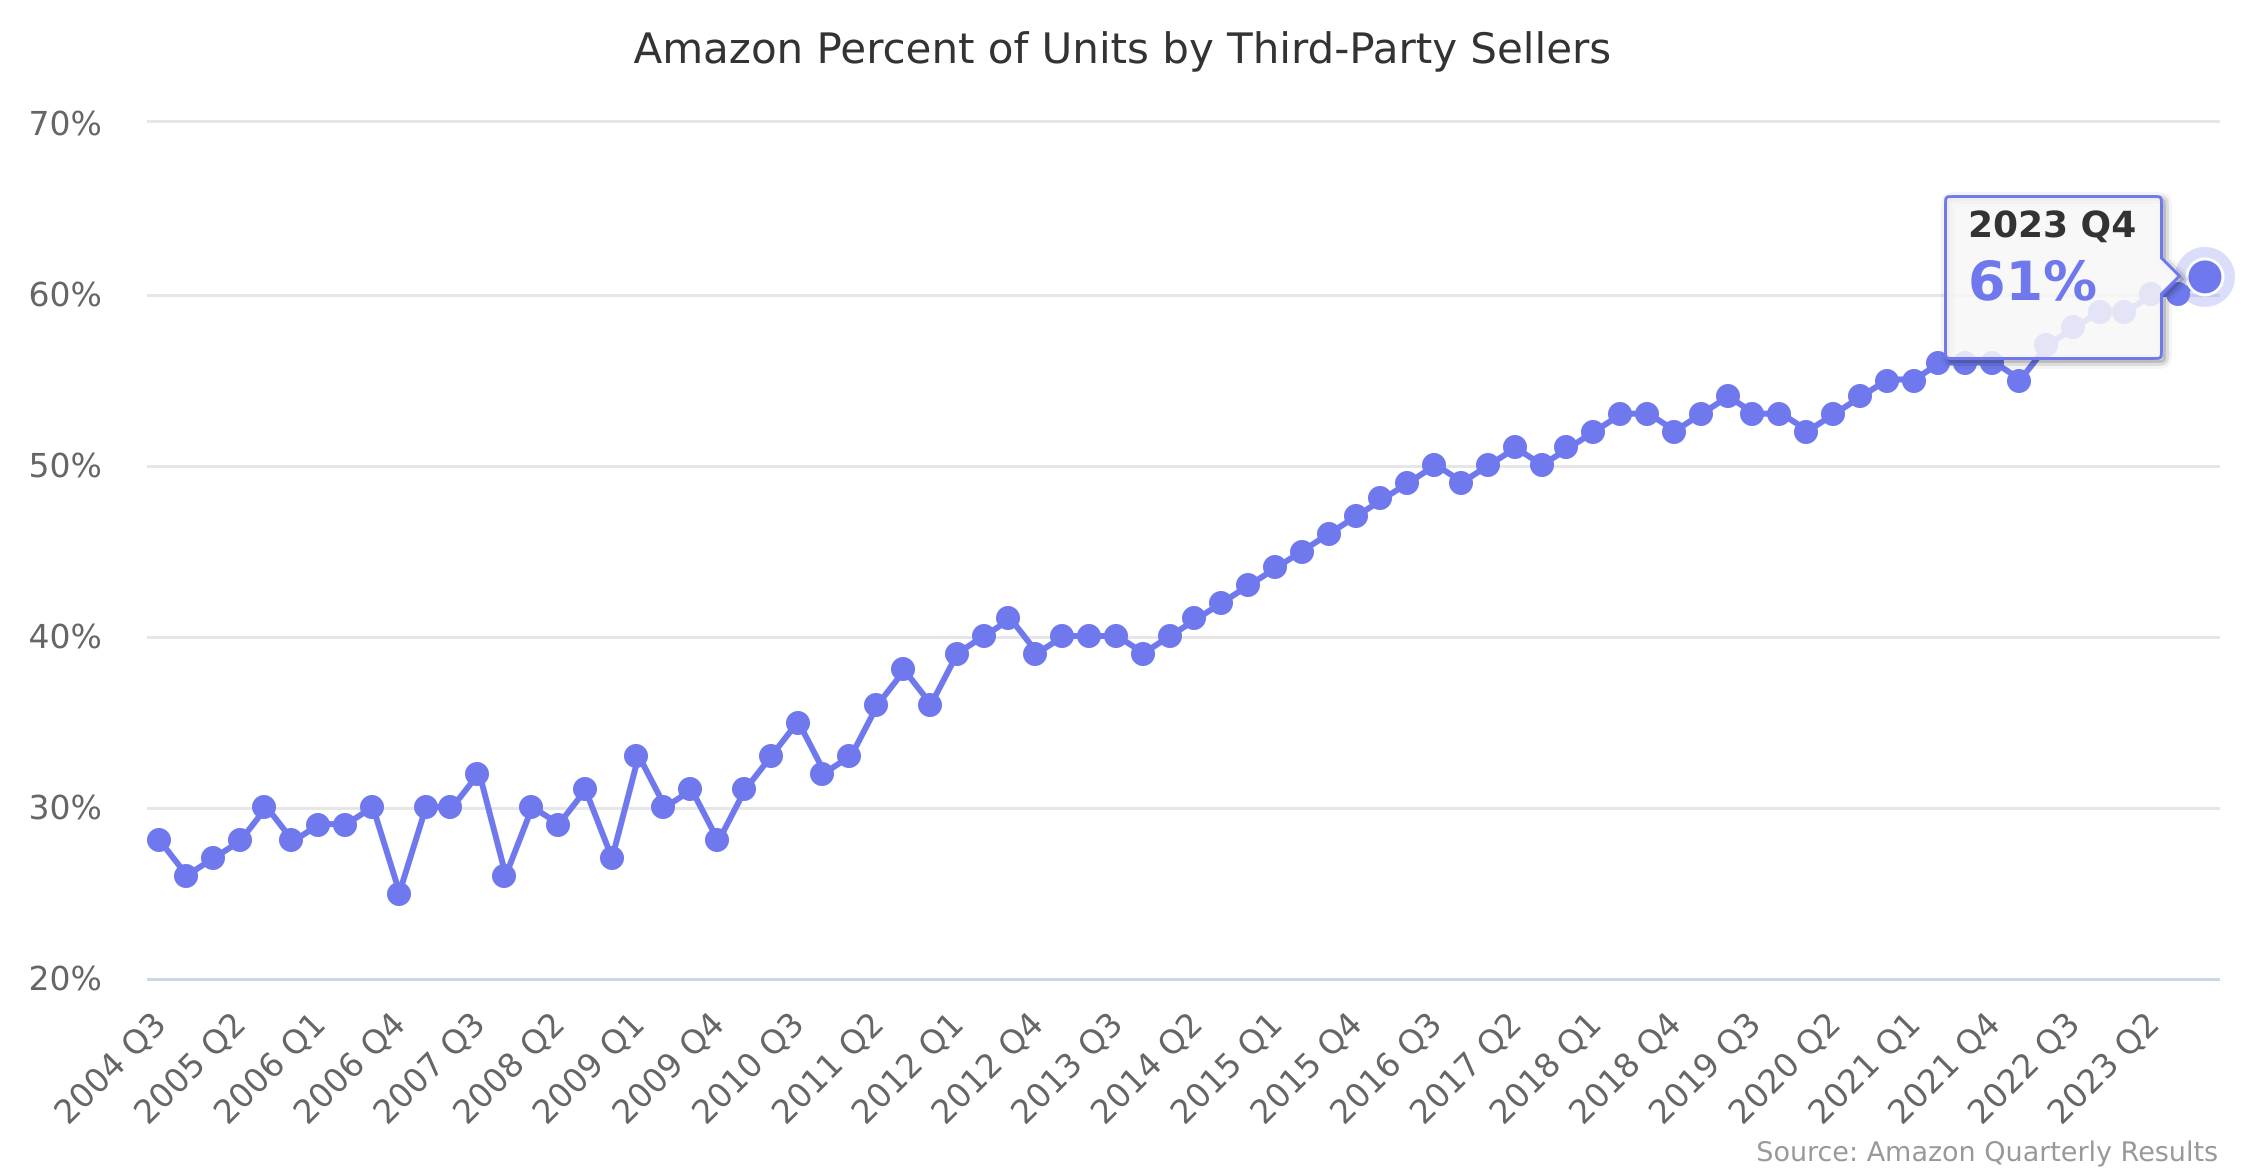 Amazon Percent of Units by Third-Party Sellers 2004-2022